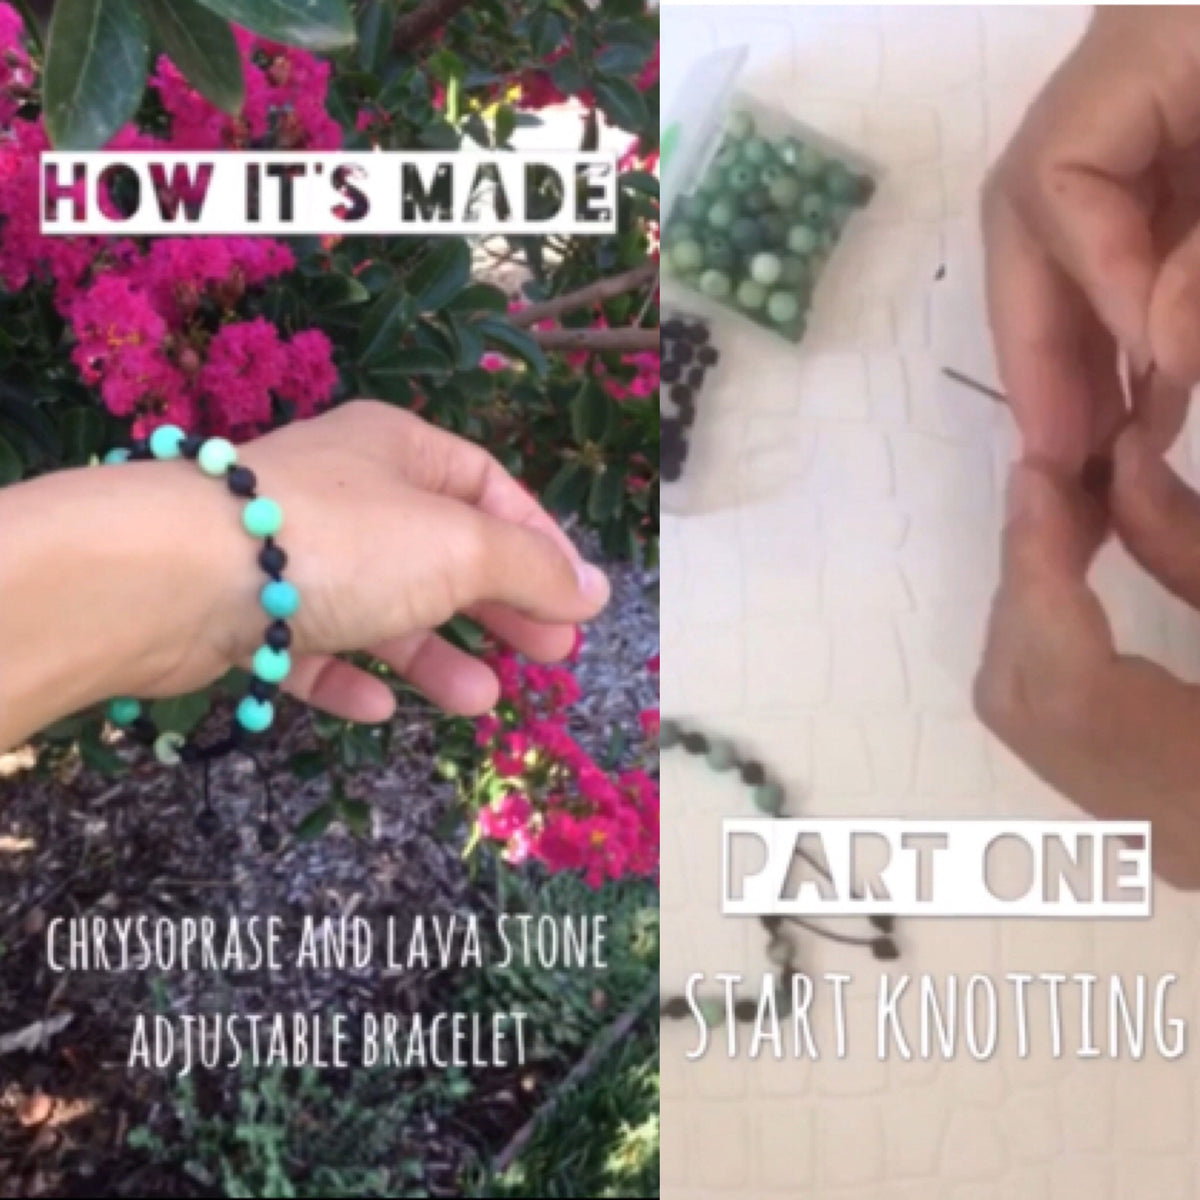 How It's Made: Chrysoprase and Lava Stone Bracelet